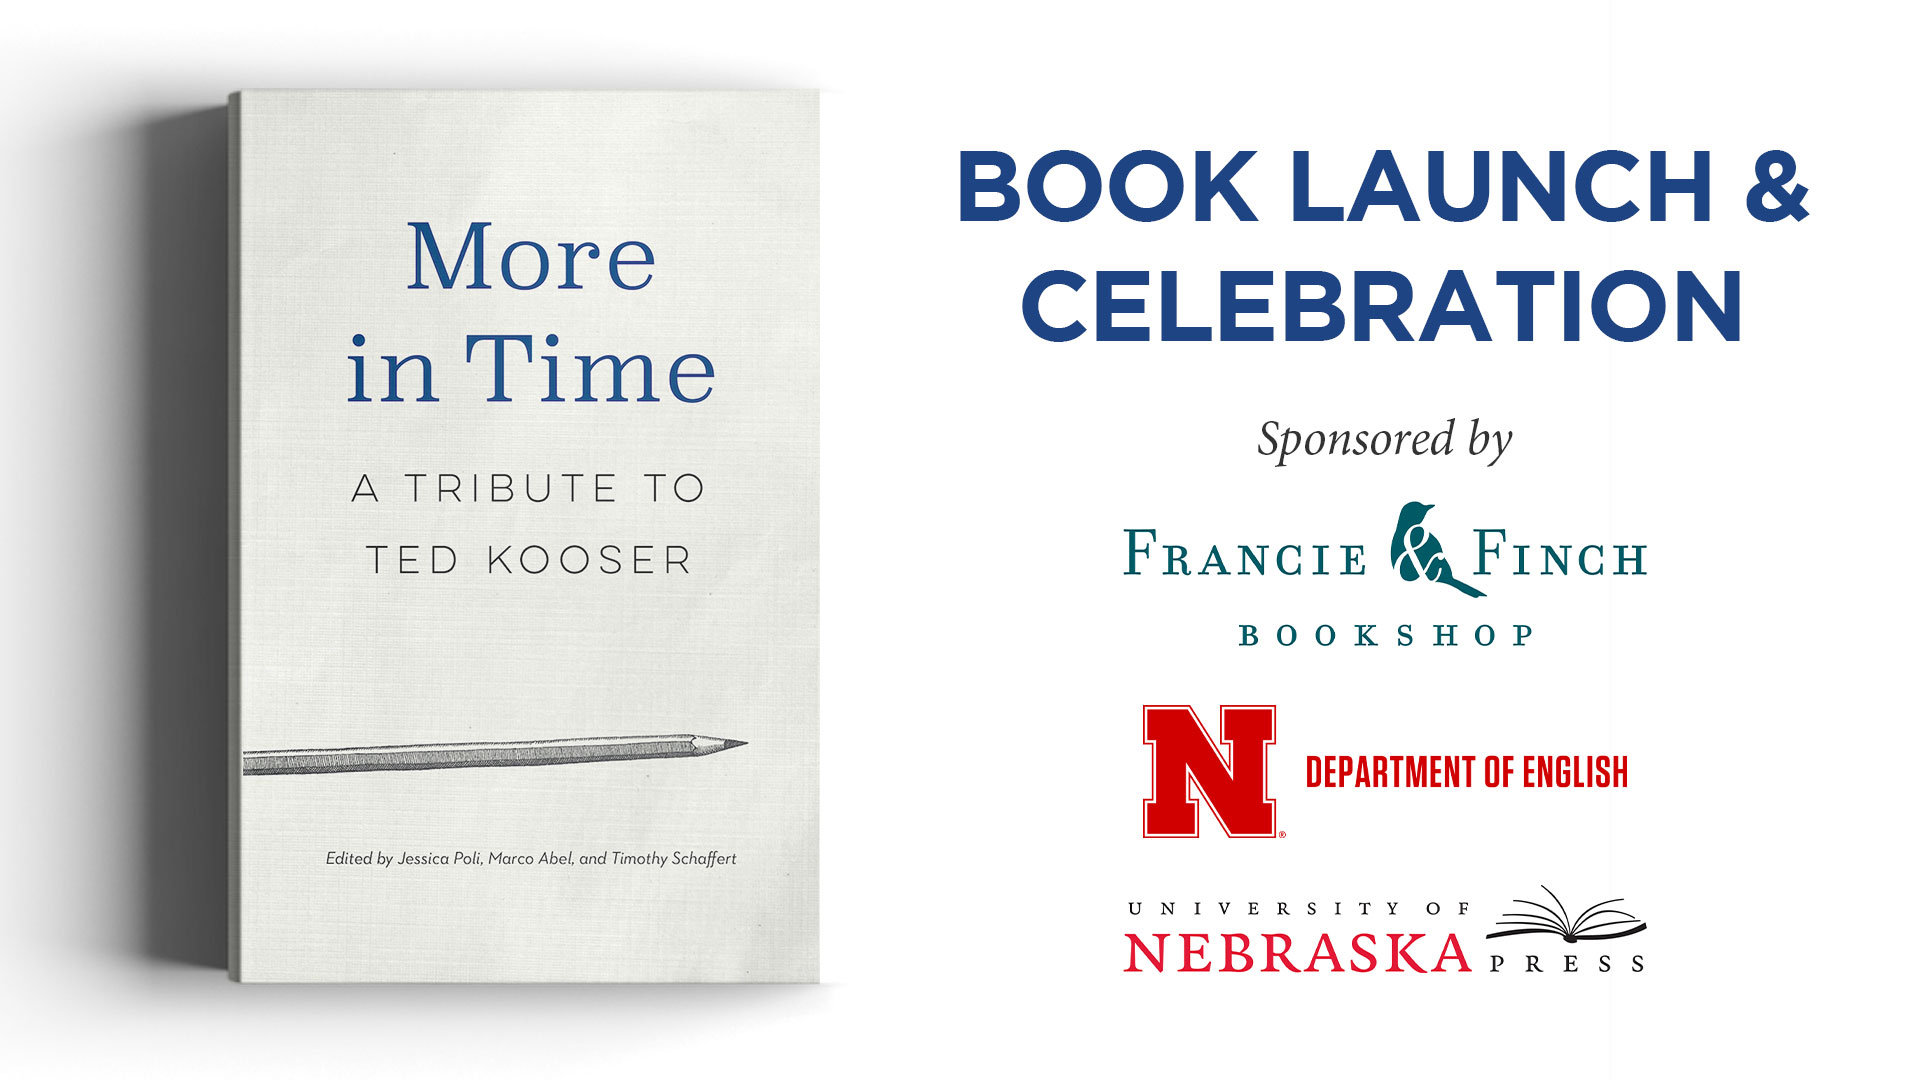 More in Time: A Tribute to Ted Kooser - book launch & celebration